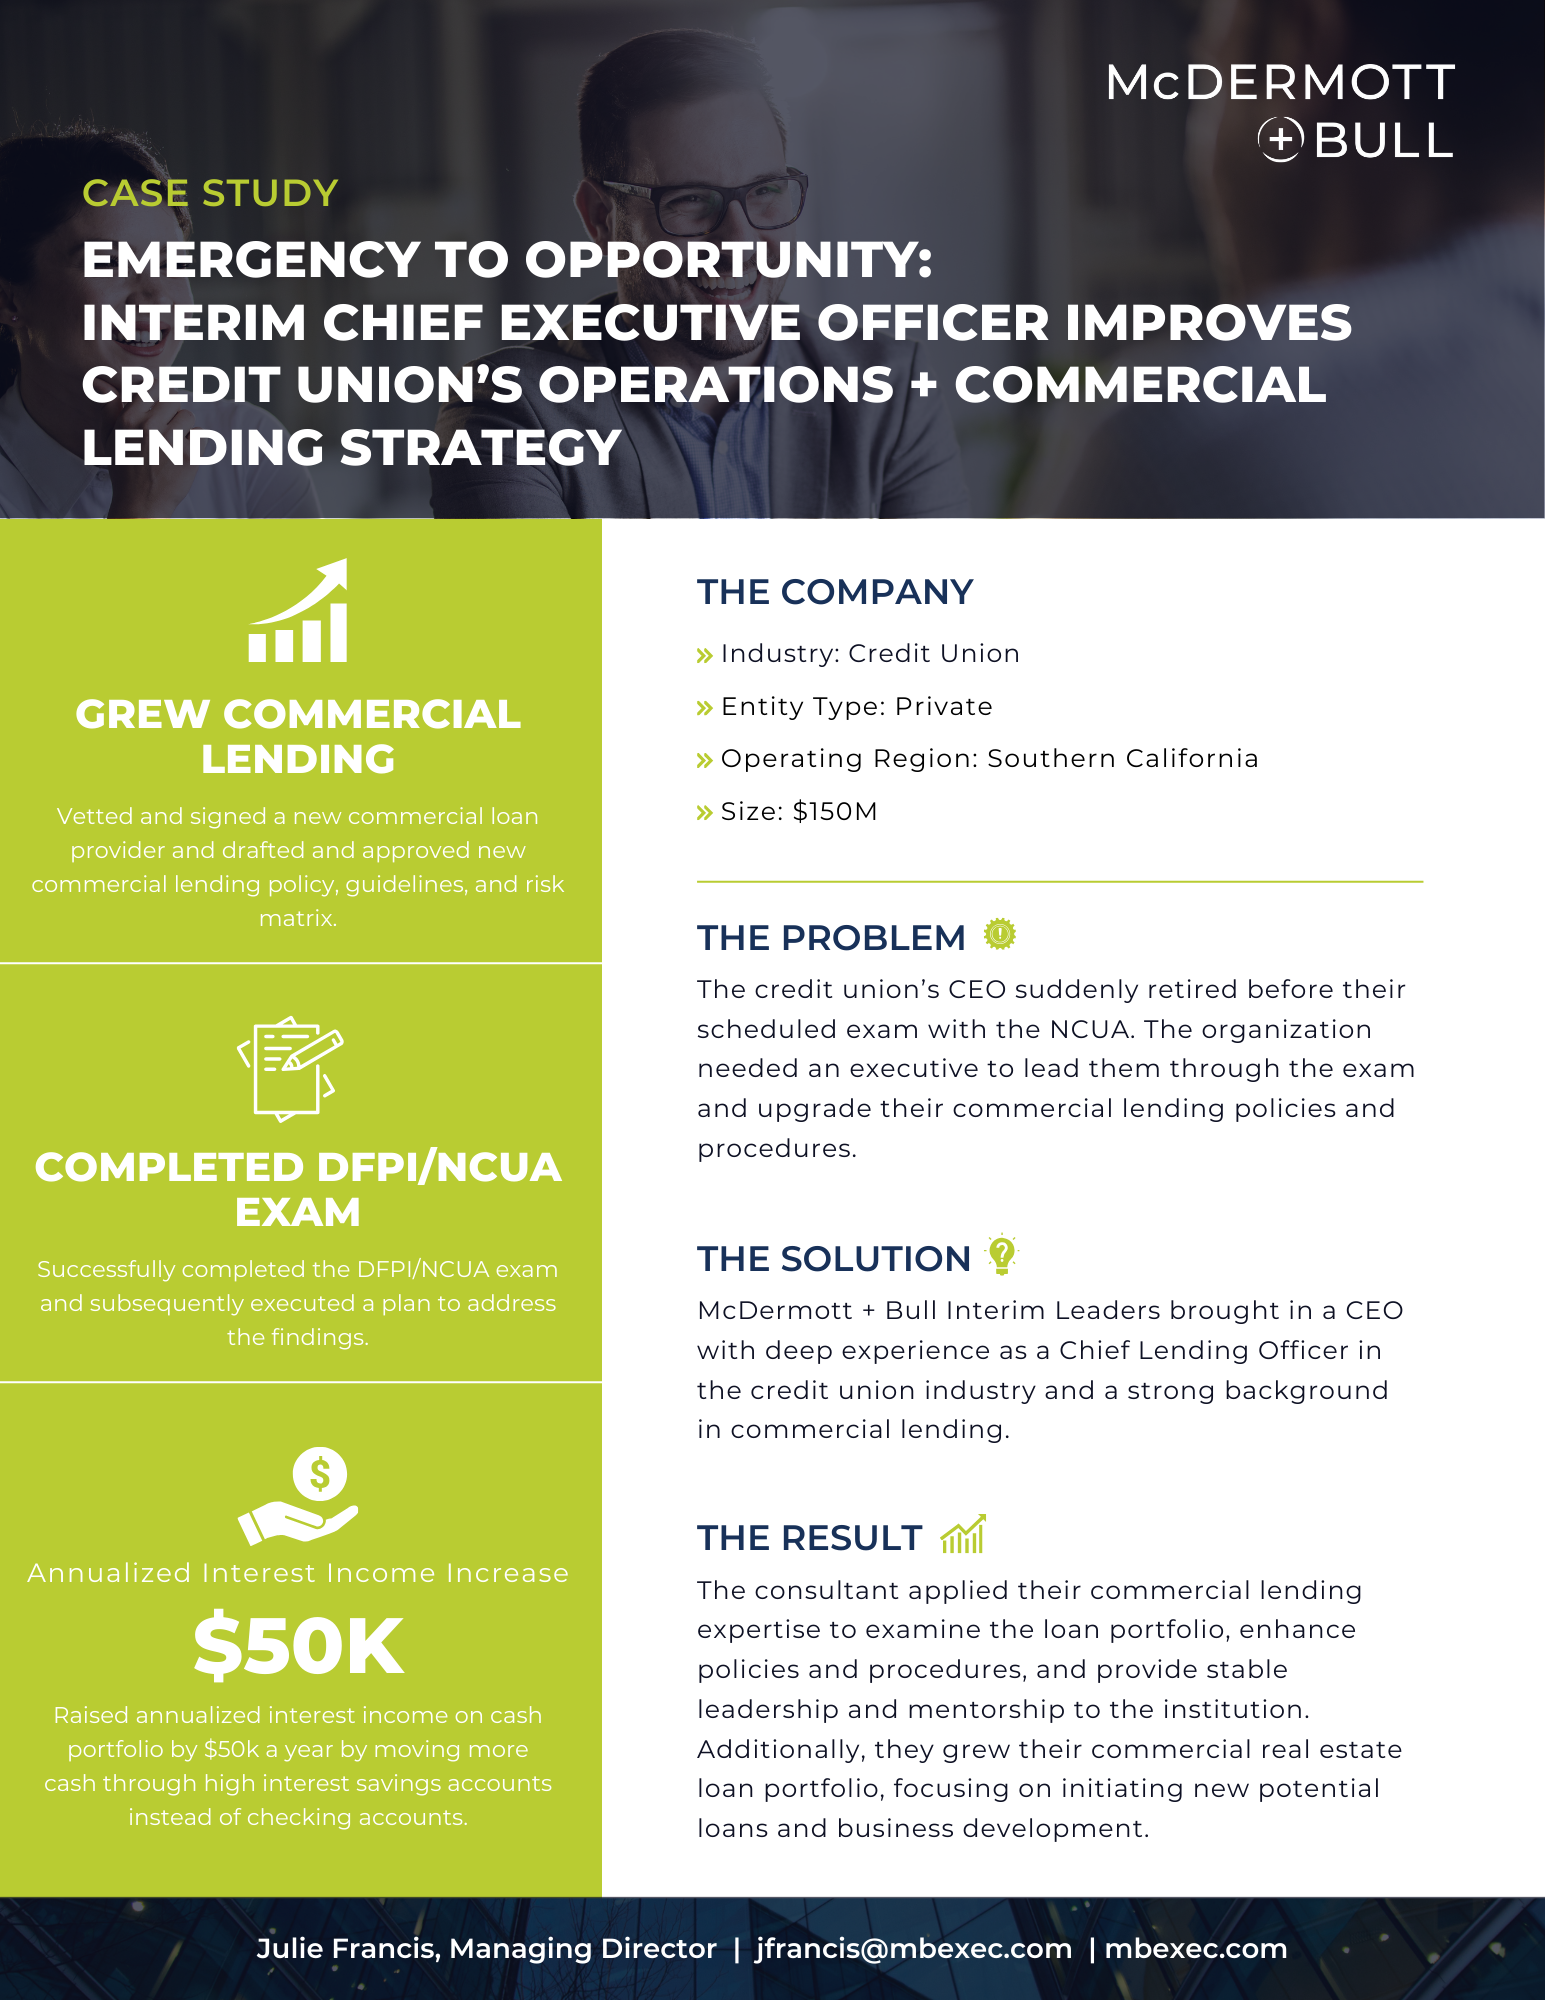 Emergency to Opportunity: 
Interim Chief Executive Officer IMPROVES Credit Union’s OPERATIONS + Commercial Lending STRATEGY